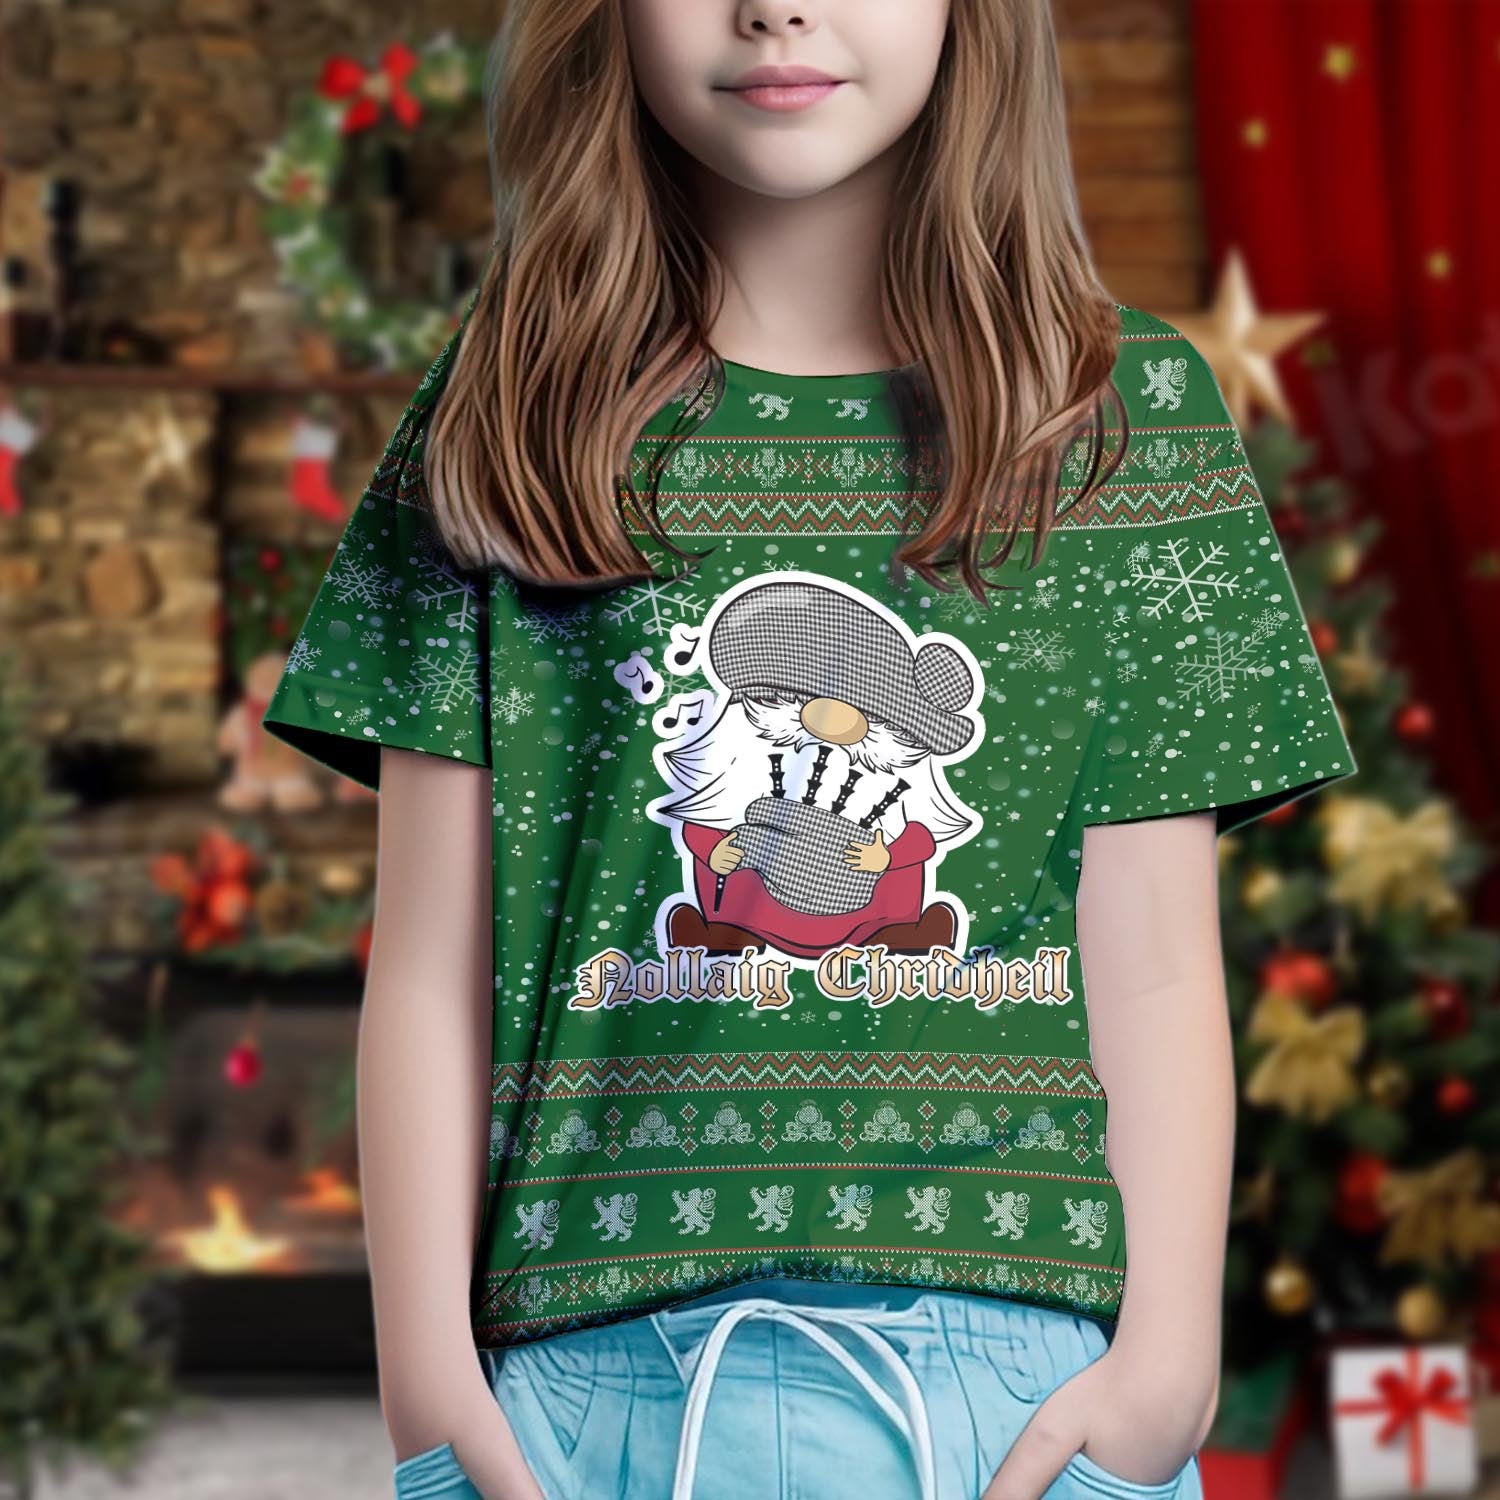 Shepherd Clan Christmas Family T-Shirt with Funny Gnome Playing Bagpipes Kid's Shirt Green - Tartanvibesclothing